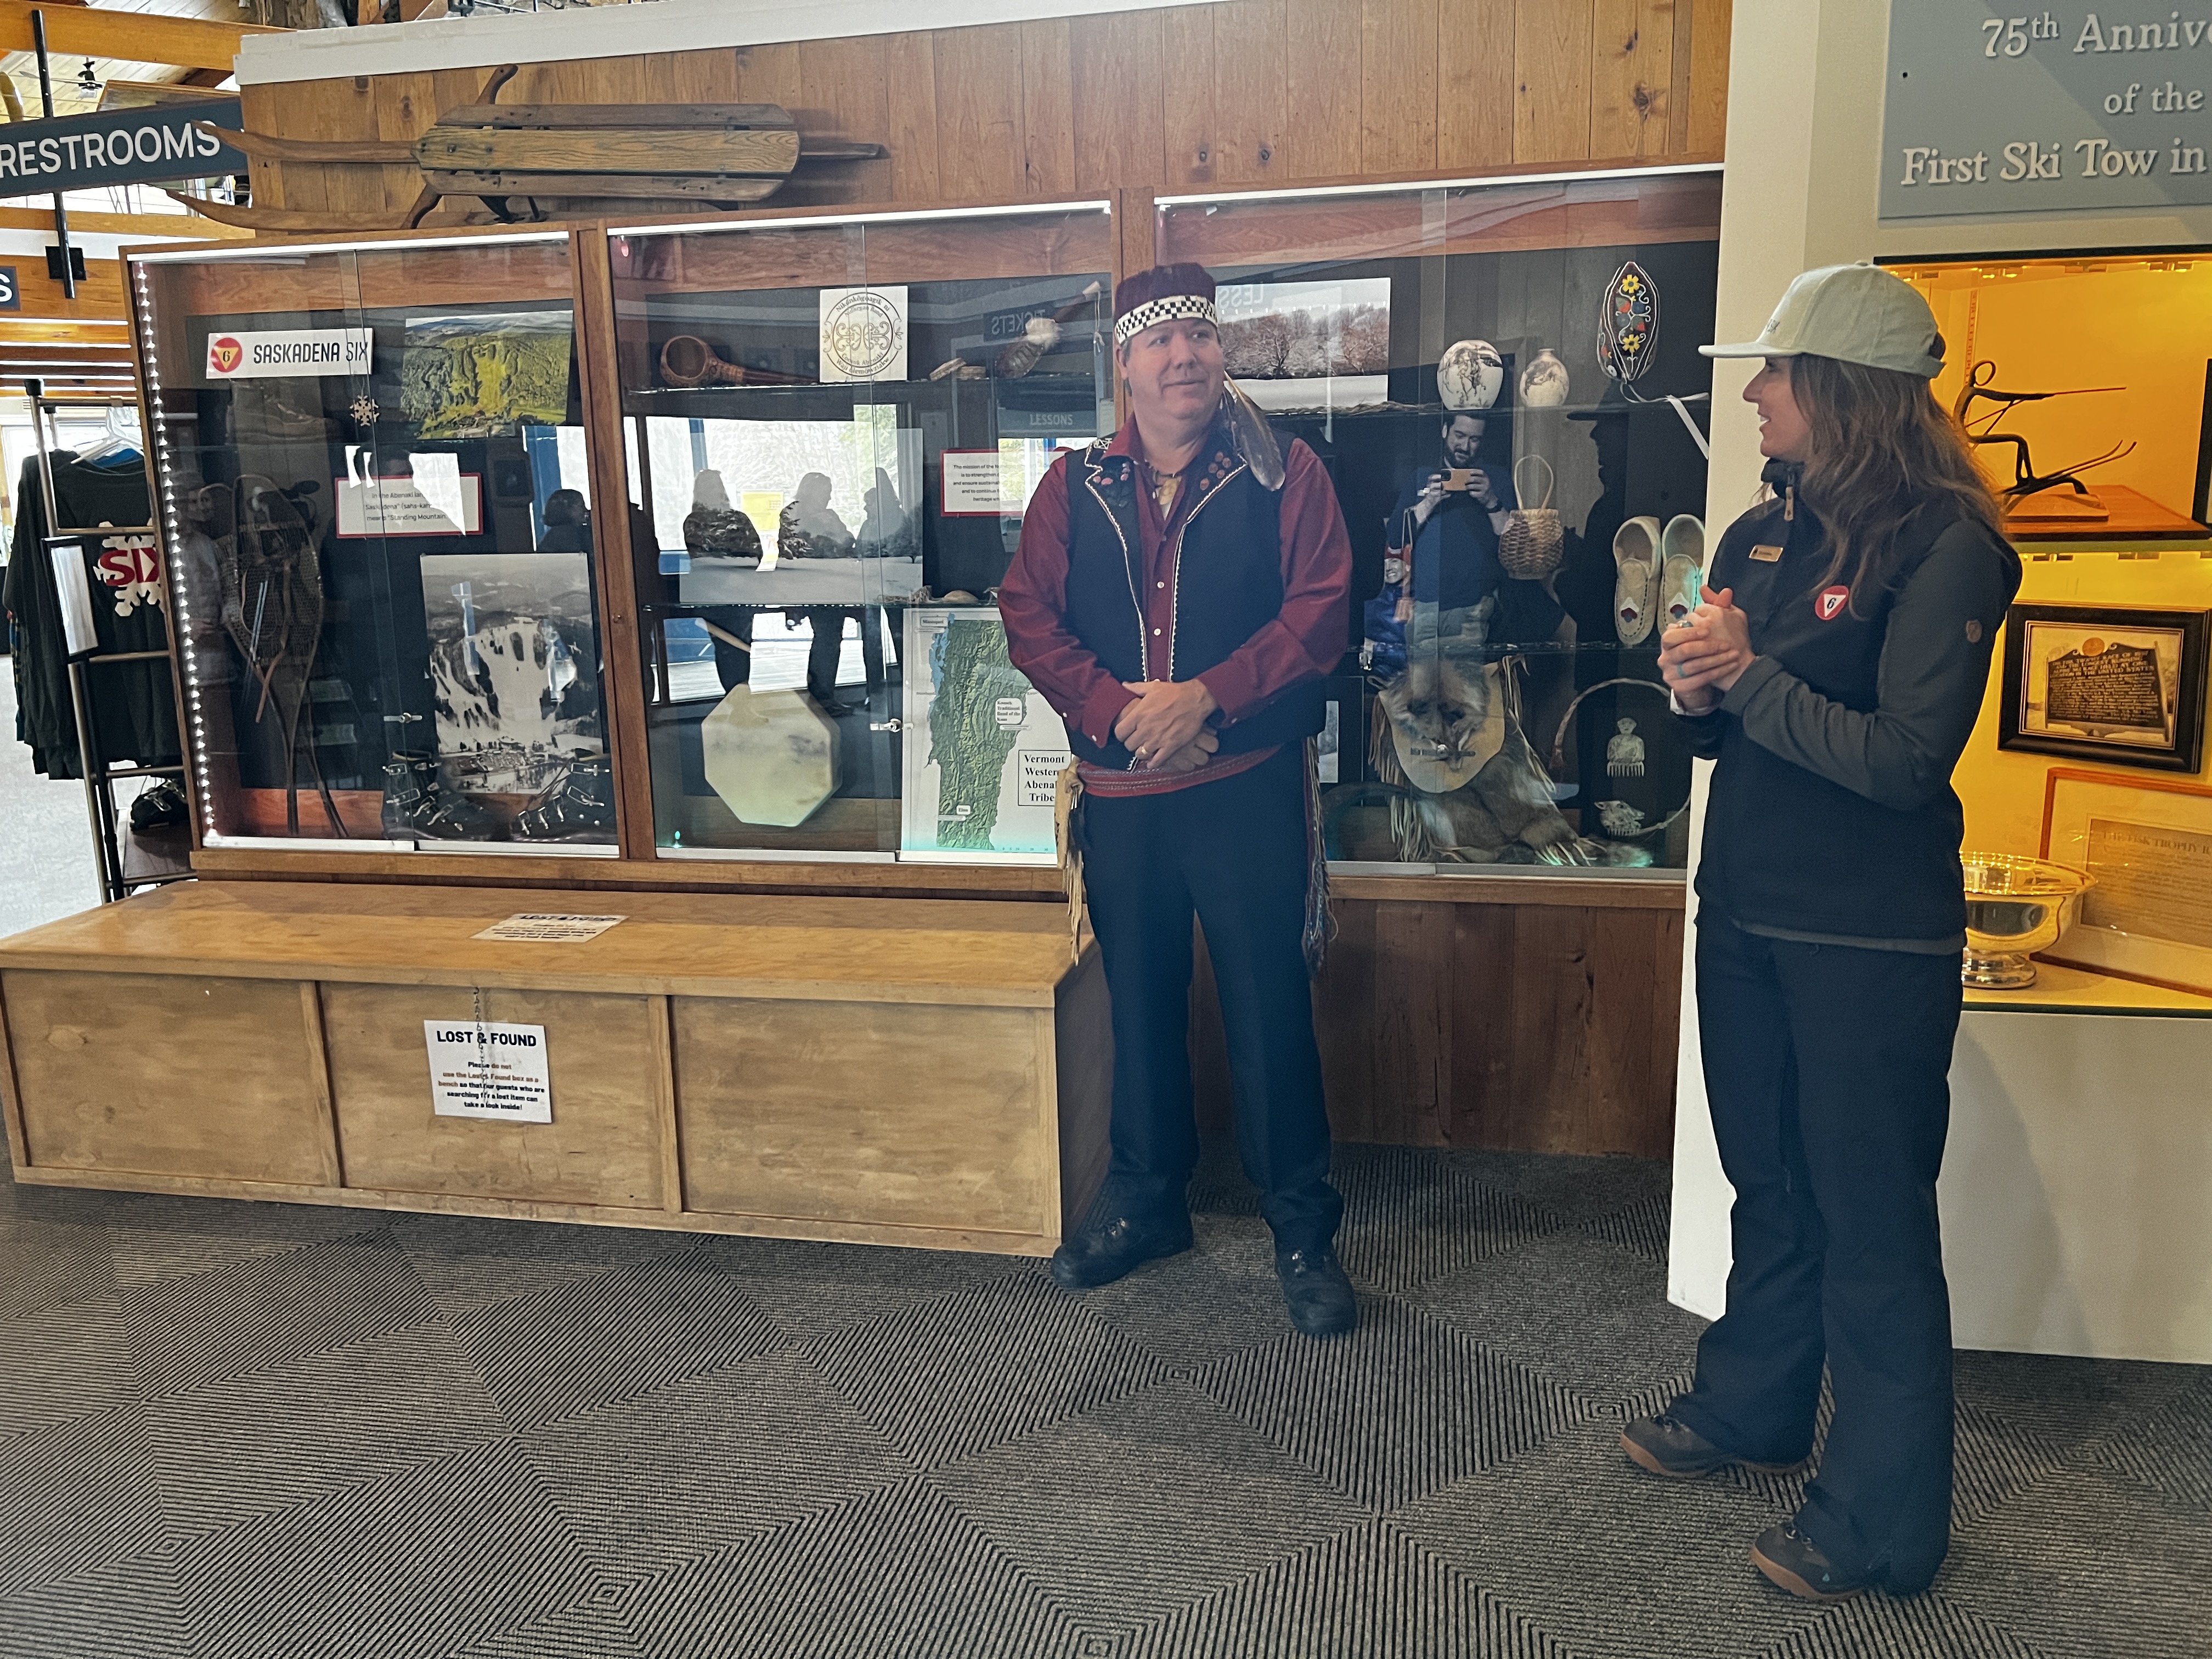 Chief Don Stevens and Director of Recreational Experiences Christina Mattson discuss the partnership that ultimately created the display.Chief Don Stevens and Director of Recreational Experiences Christina Mattson discuss the partnership that ultimately created the display.